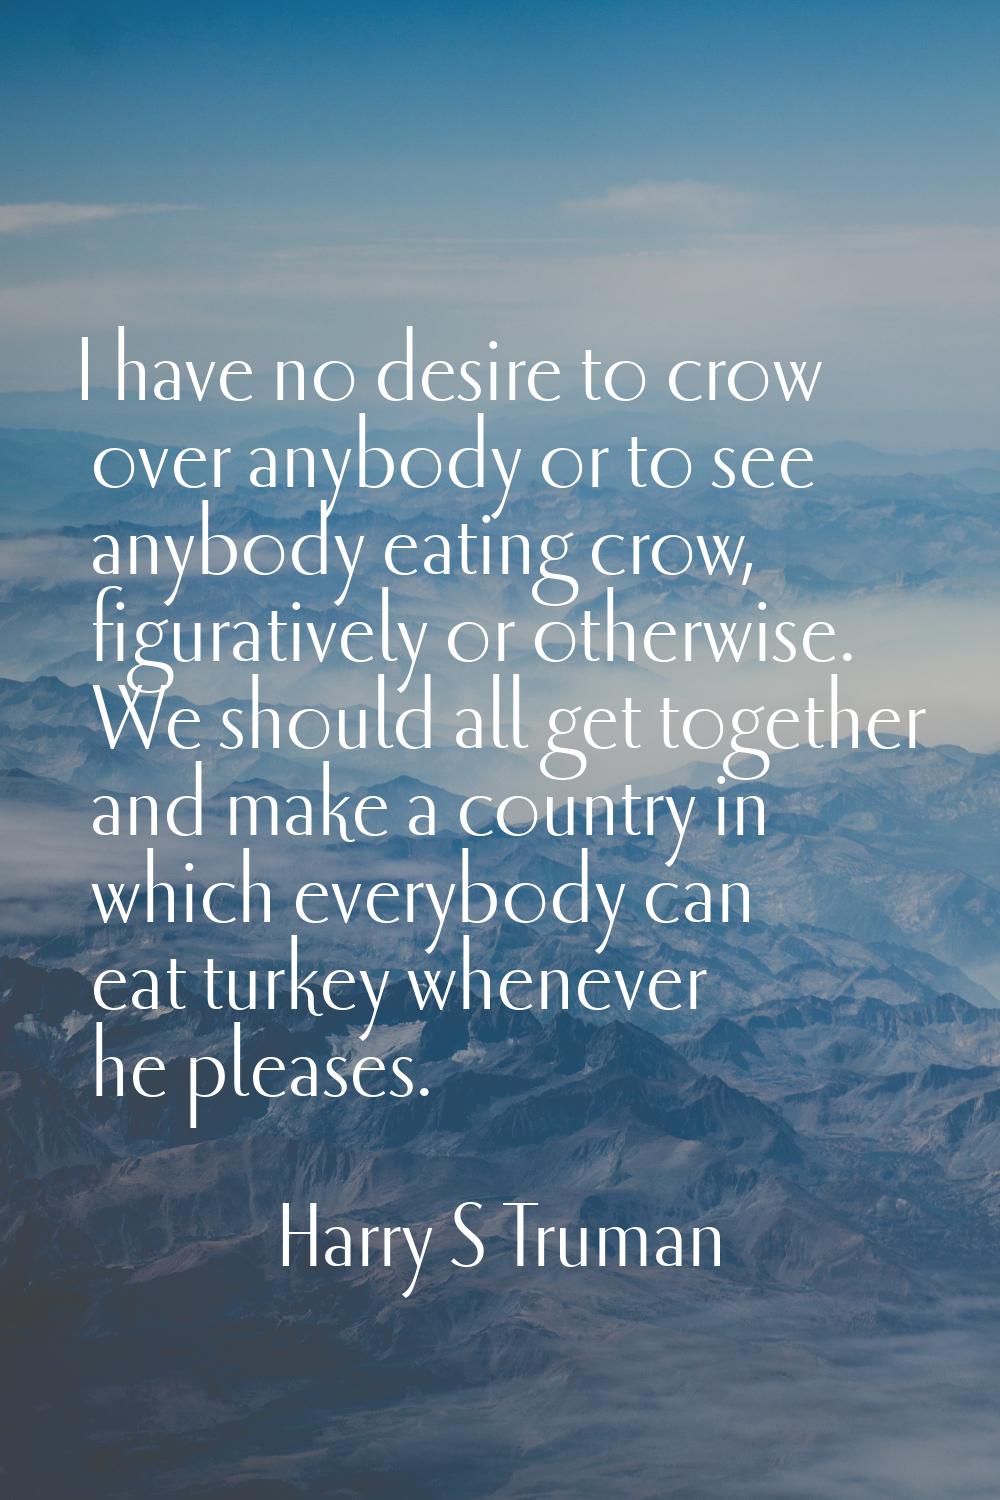 I have no desire to crow over anybody or to see anybody eating crow, figuratively or otherwise. We 